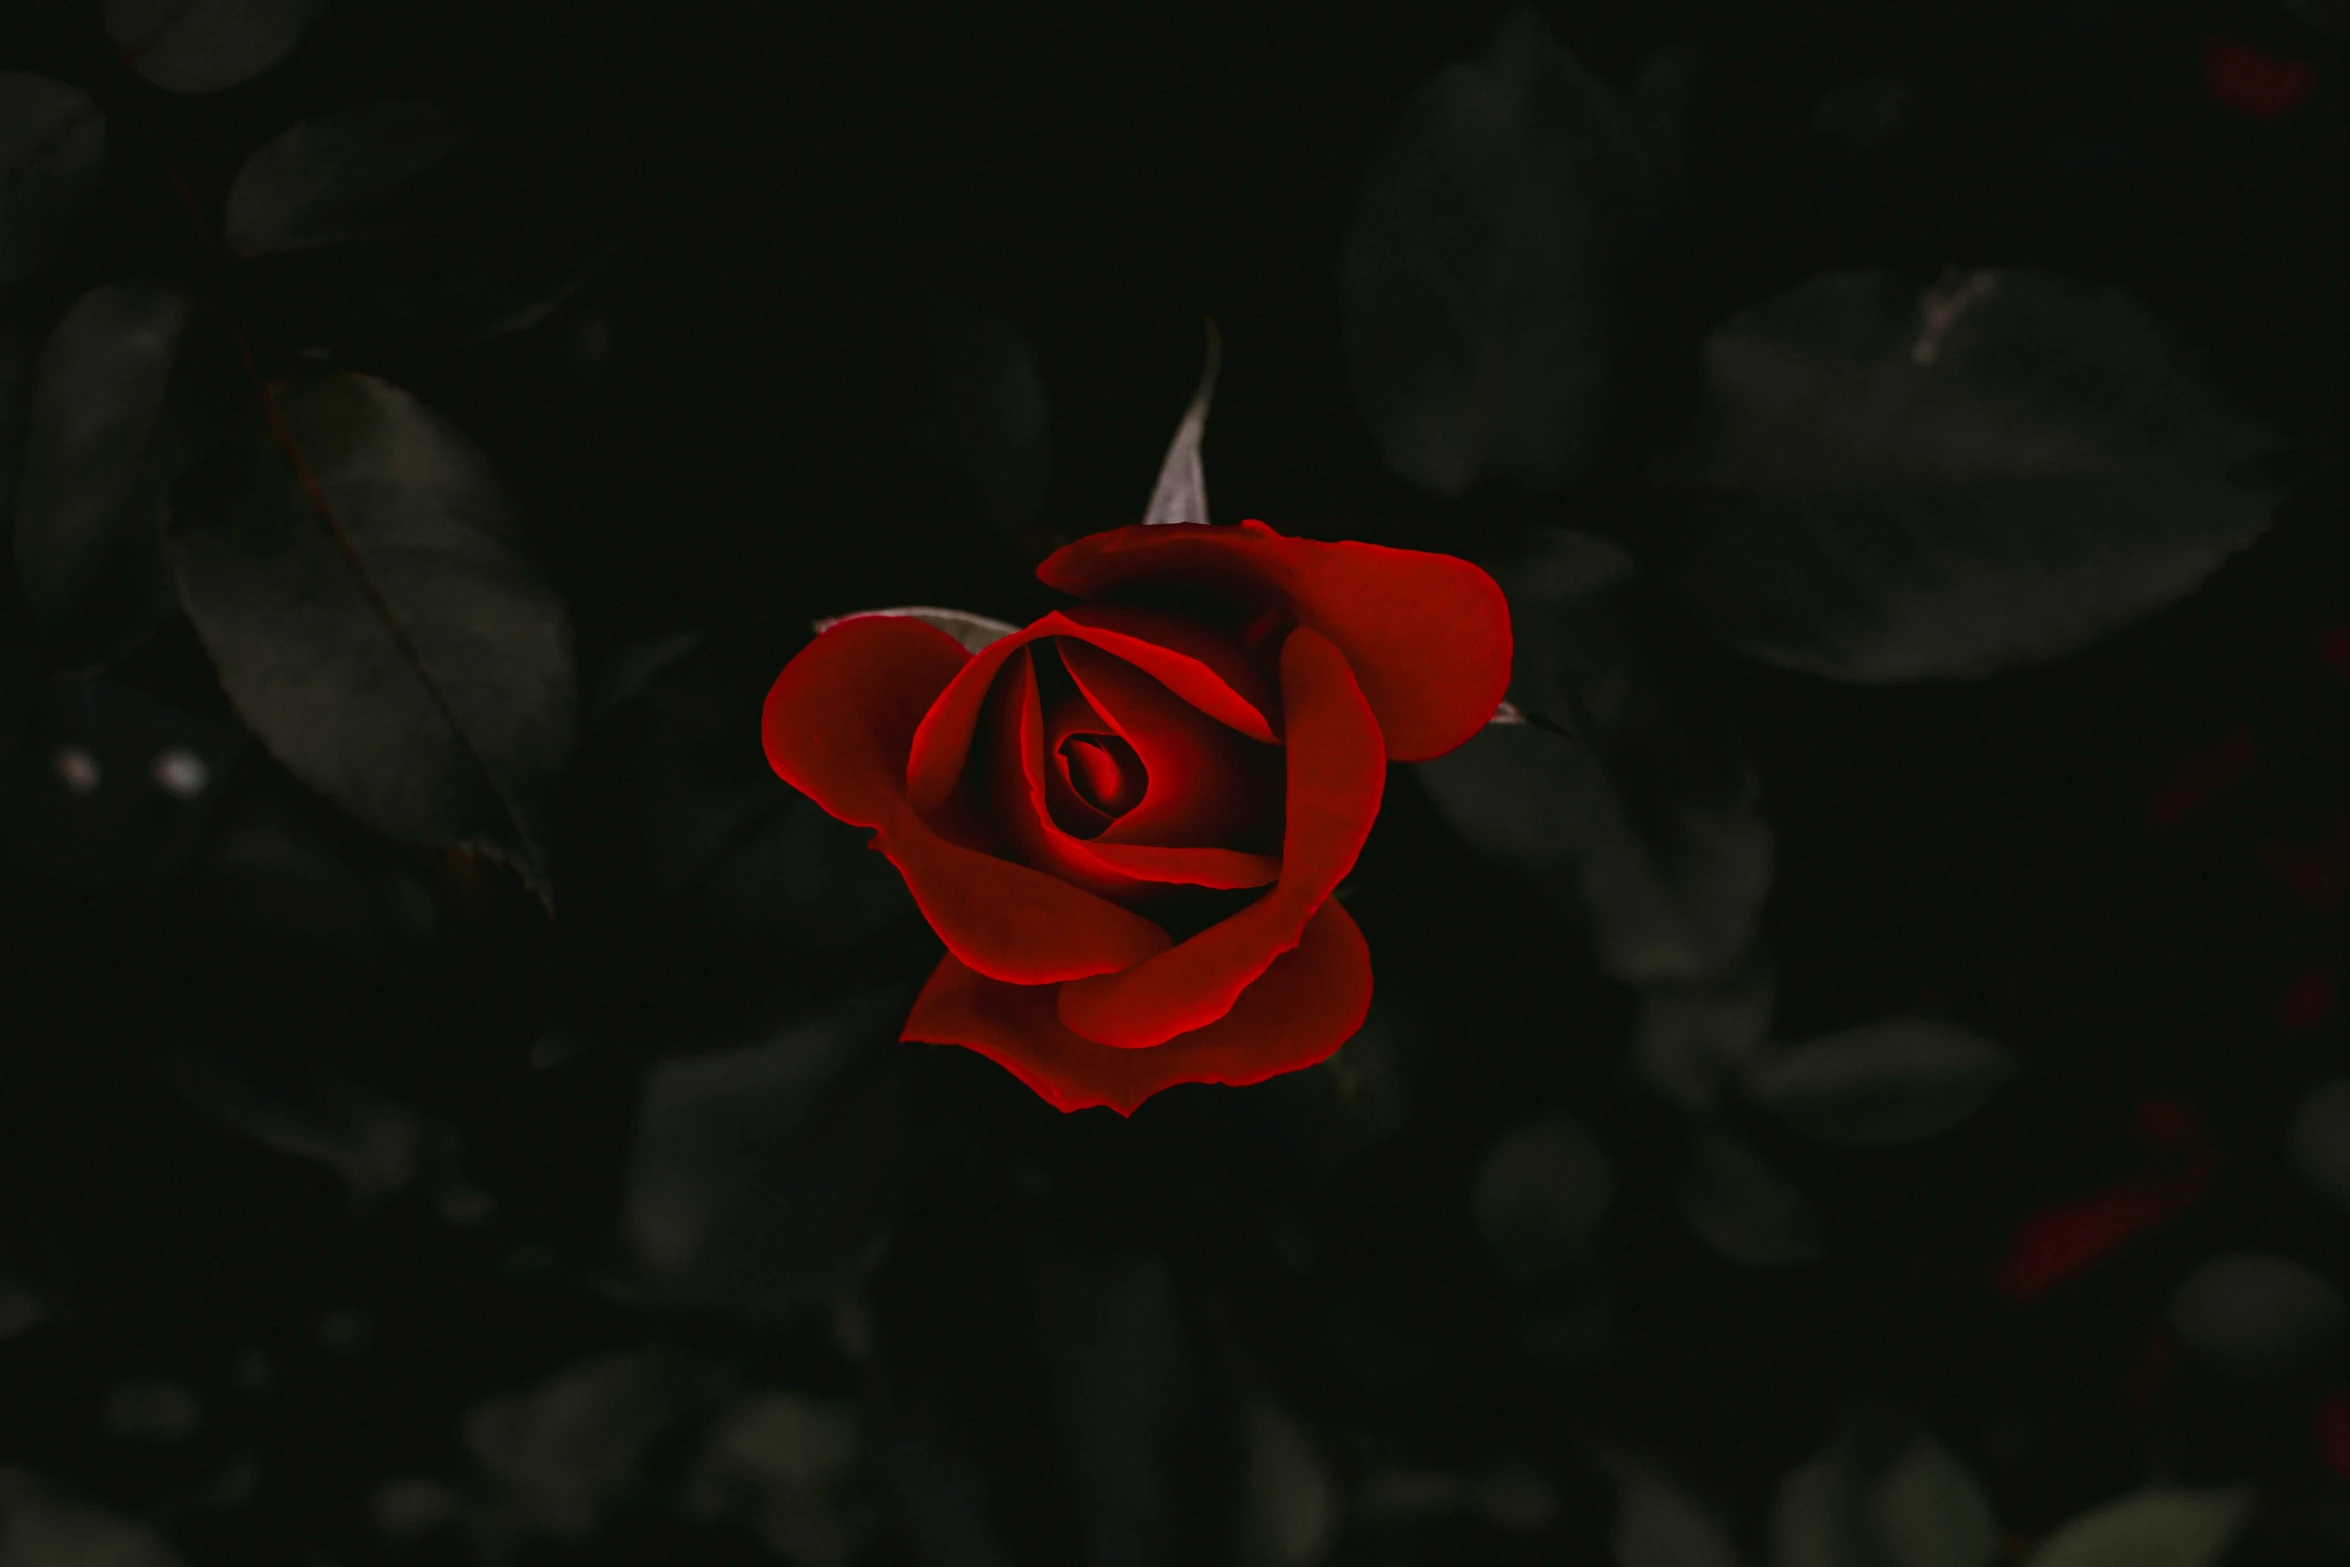 the rose is sitting alone in the dark